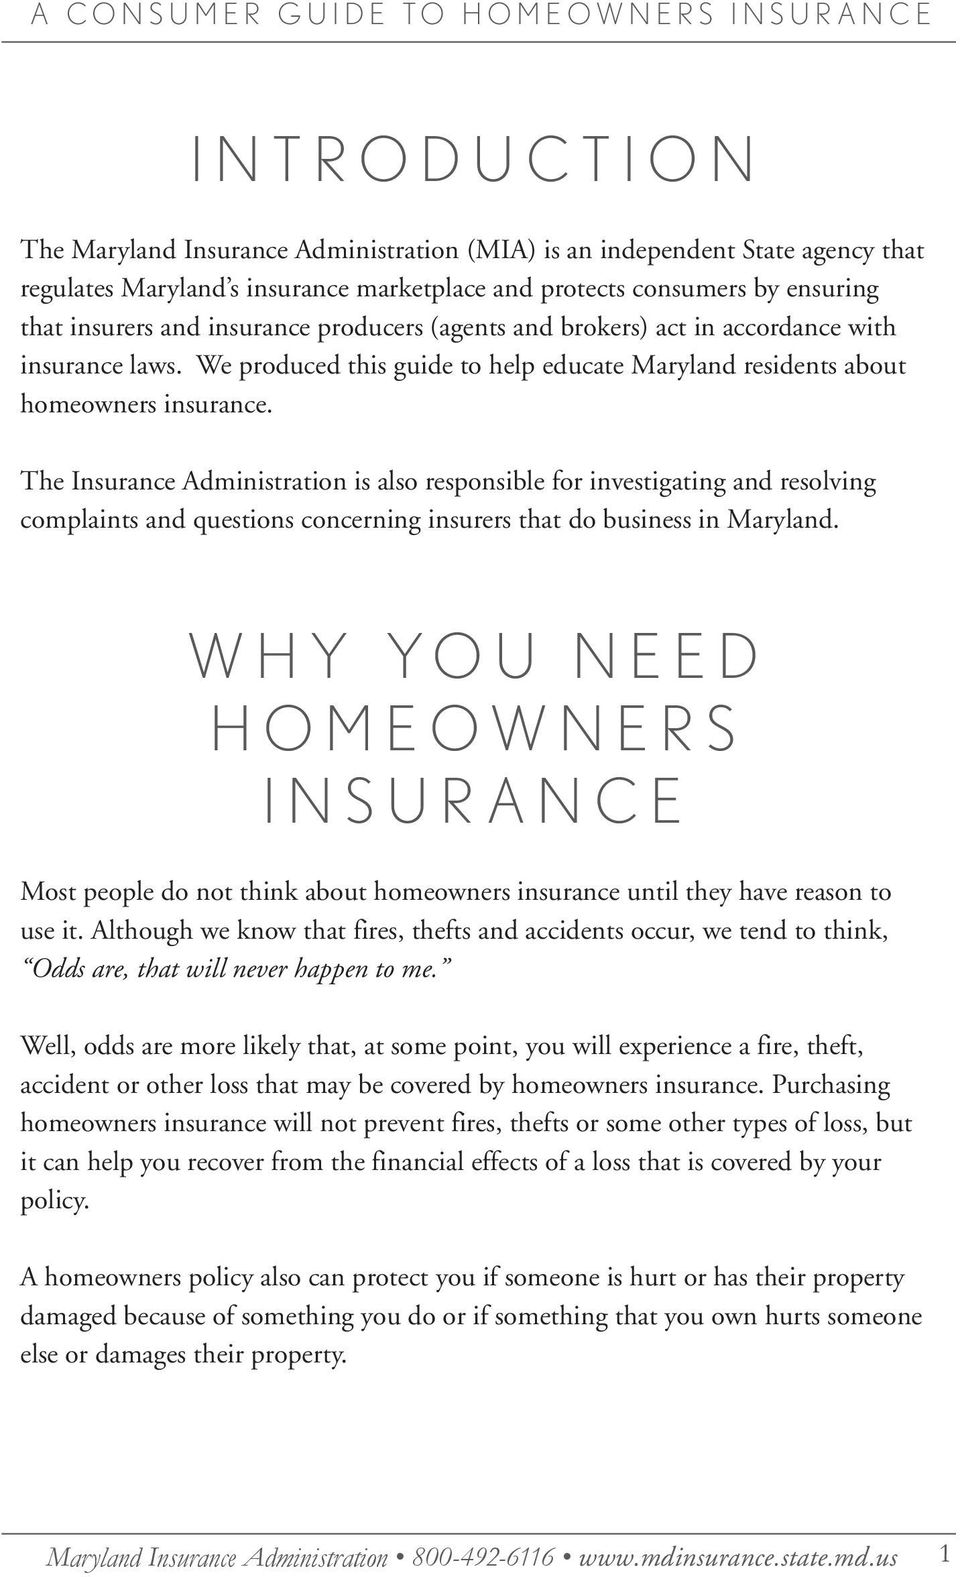 The Insurance Administration is also responsible for investigating and resolving complaints and questions concerning insurers that do business in Maryland.